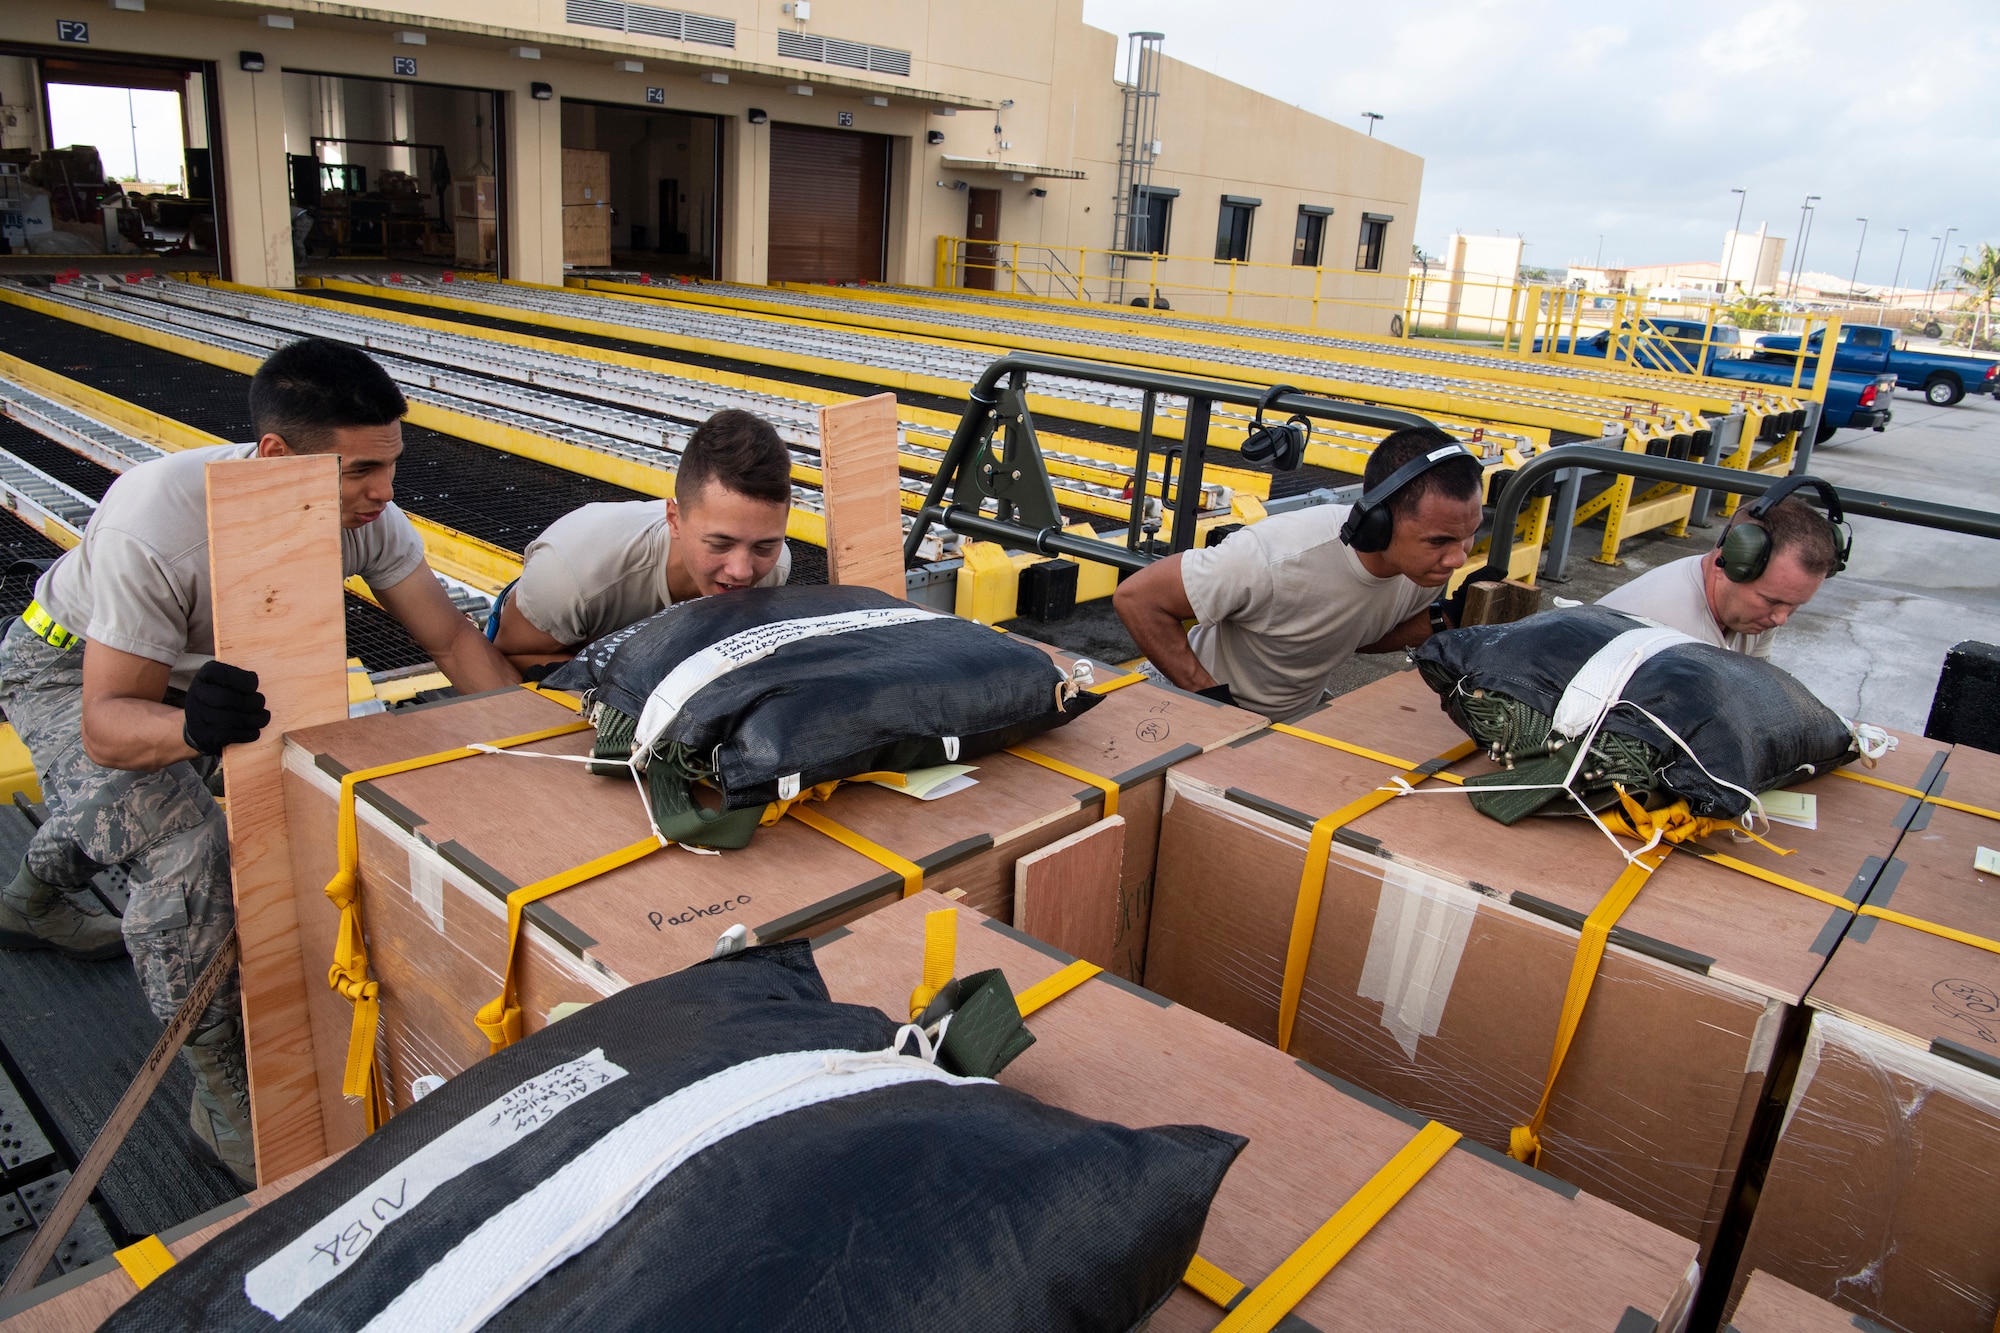 U.S. Air Force Airman 1st Class Joshua San Agustin (left-right), Airman Giovanni Manglona, Airman Brandon Phillip and Master Sgt. David Popp, all air transportation specialist with the U.S. Air Force Reserve’s 44th Aerial Port Squadron, load and secure airdrop bundles onto a Tunner 60K aircraft loader for transportation out to awaiting aircraft Dec. 11, 2018, during Operation Christmas Drop at Andersen Air Force Base, Guam. Operation Christmas Drop is a U.S. Air Force-led trilateral training event that includes air support from the Japanese Air Self Defense Force and Royal Australian Air Force to airdrop supplies to the Commonwealth of the Northern Marianas, Federated States of Micronesia, and the Republic of Palau. (U.S. Air Force photo by Jerry R. Bynum)